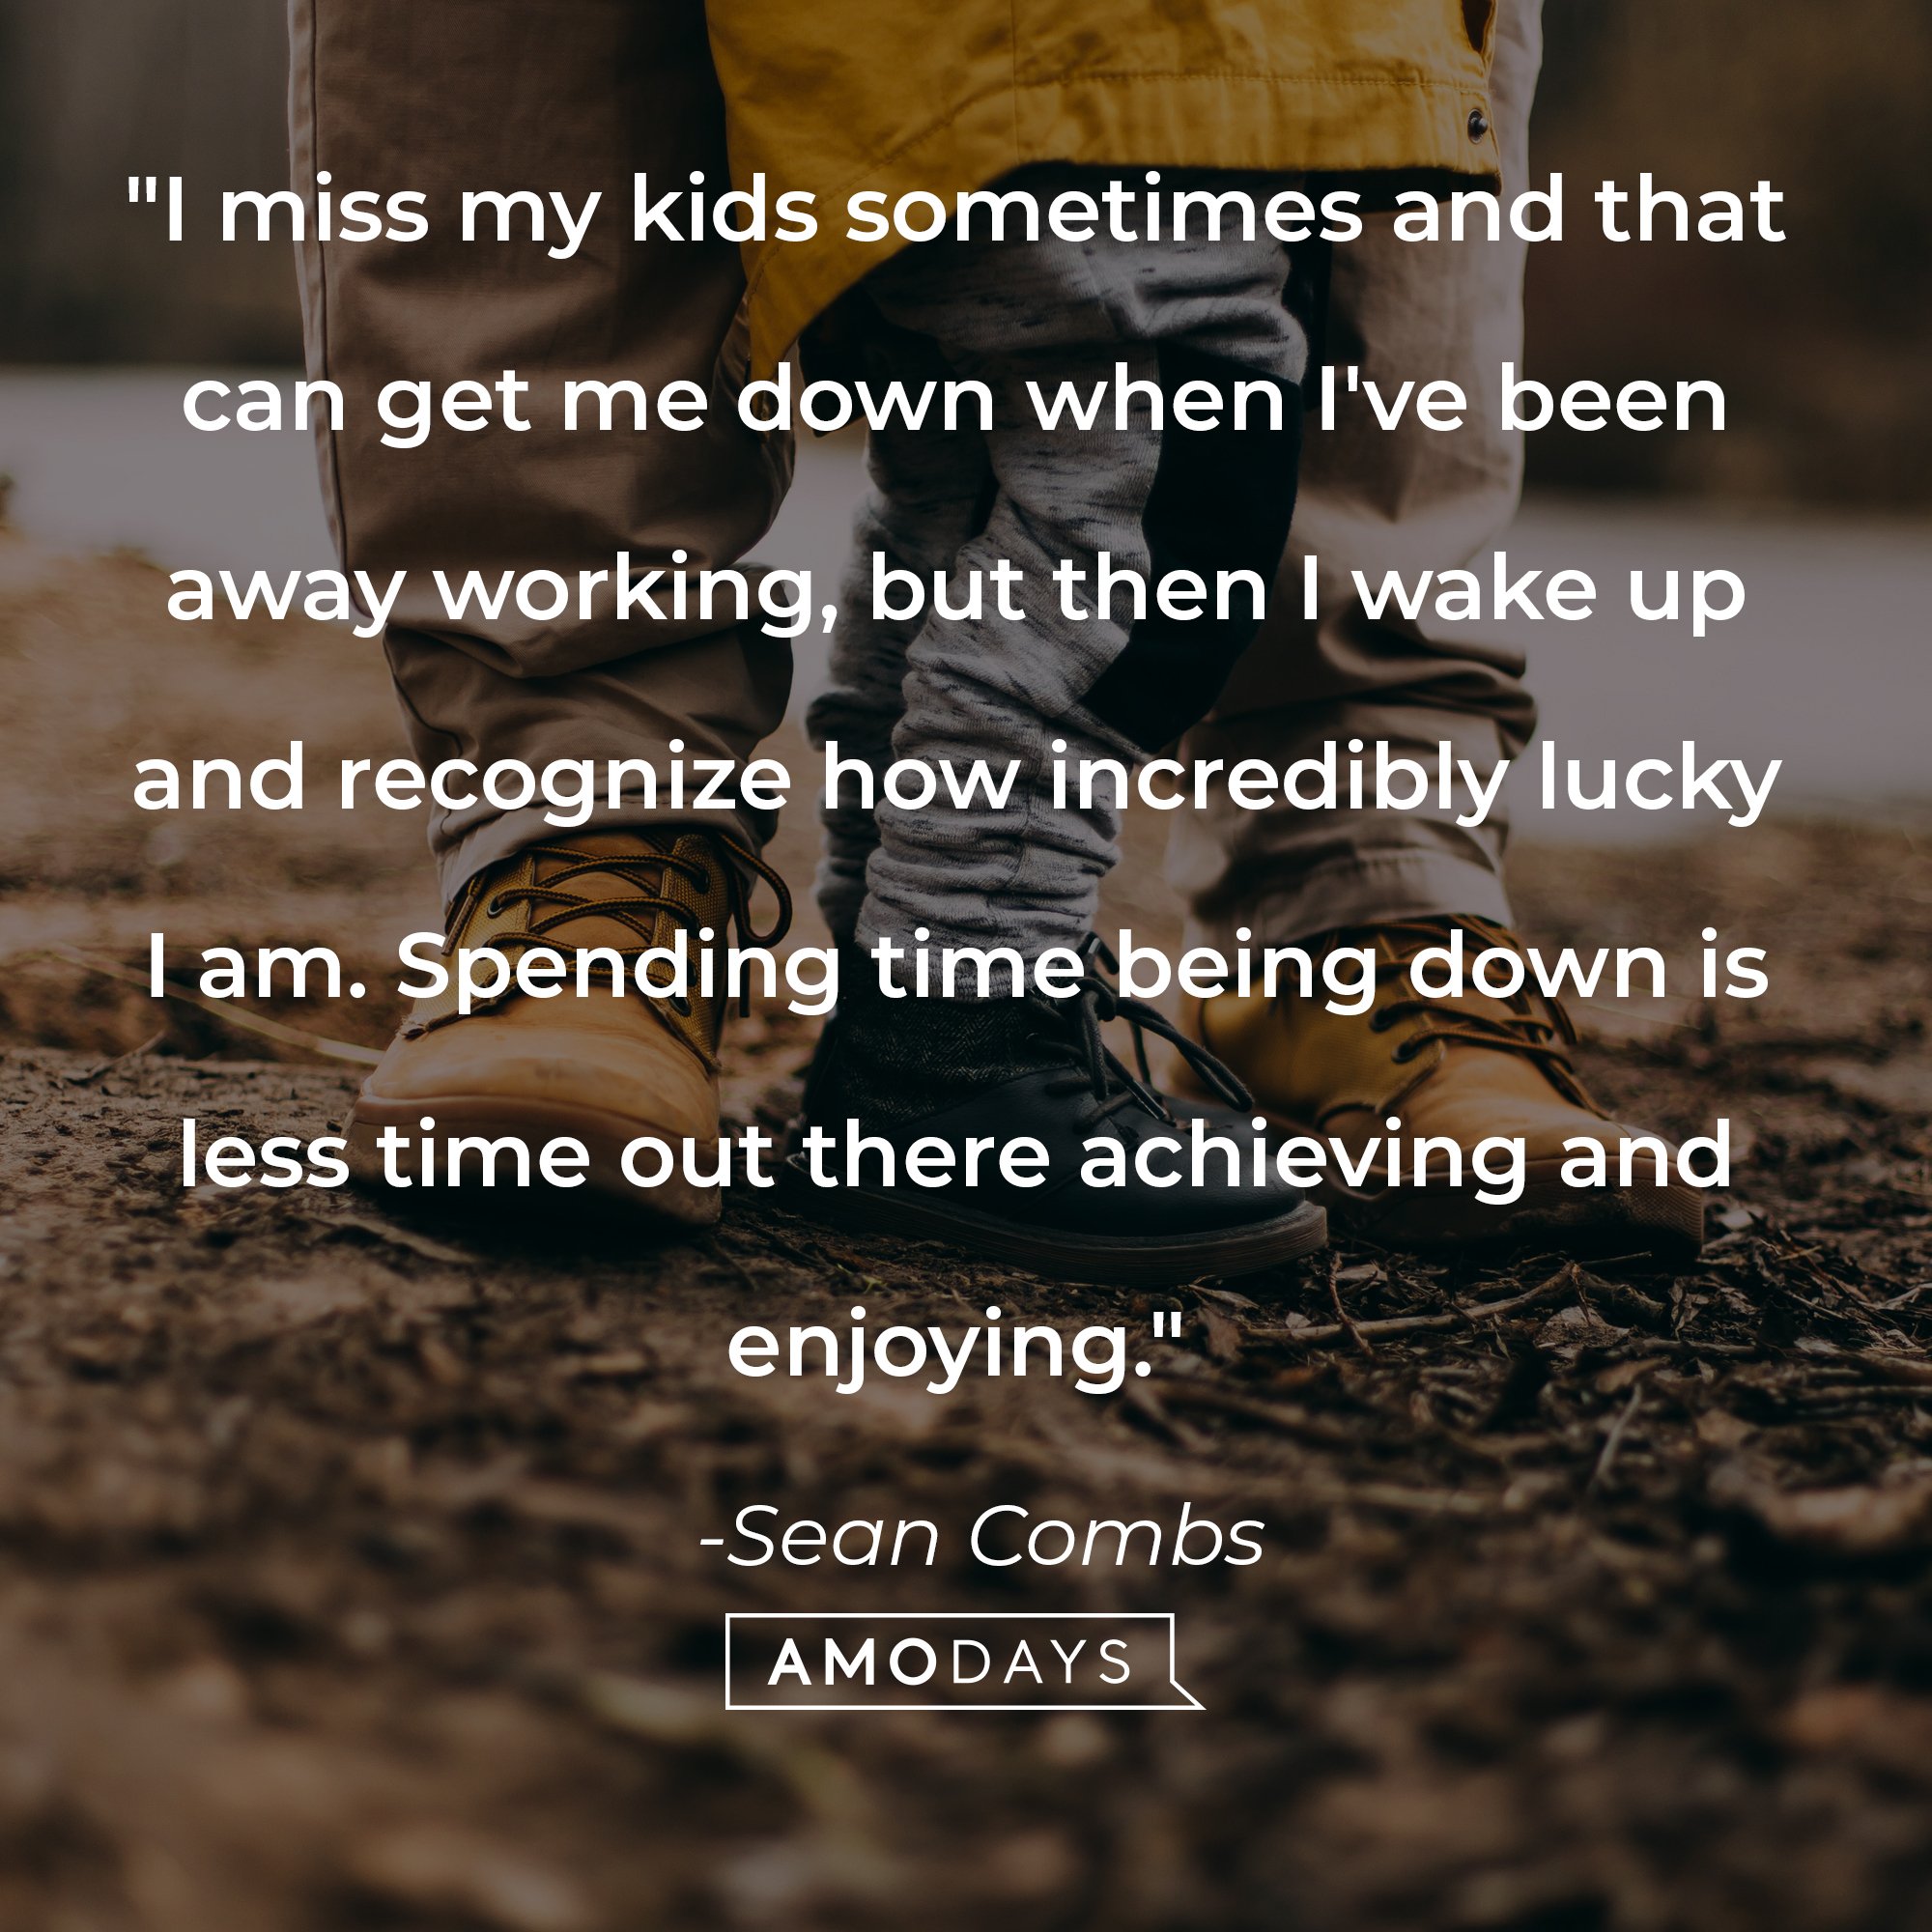 Sean Combs' quote: "I miss my kids sometimes and that can get me down when I've been away working, but then I wake up and recognize how incredibly lucky I am. Spending time being down is less time out there achieving and enjoying." | Image: AmoDays